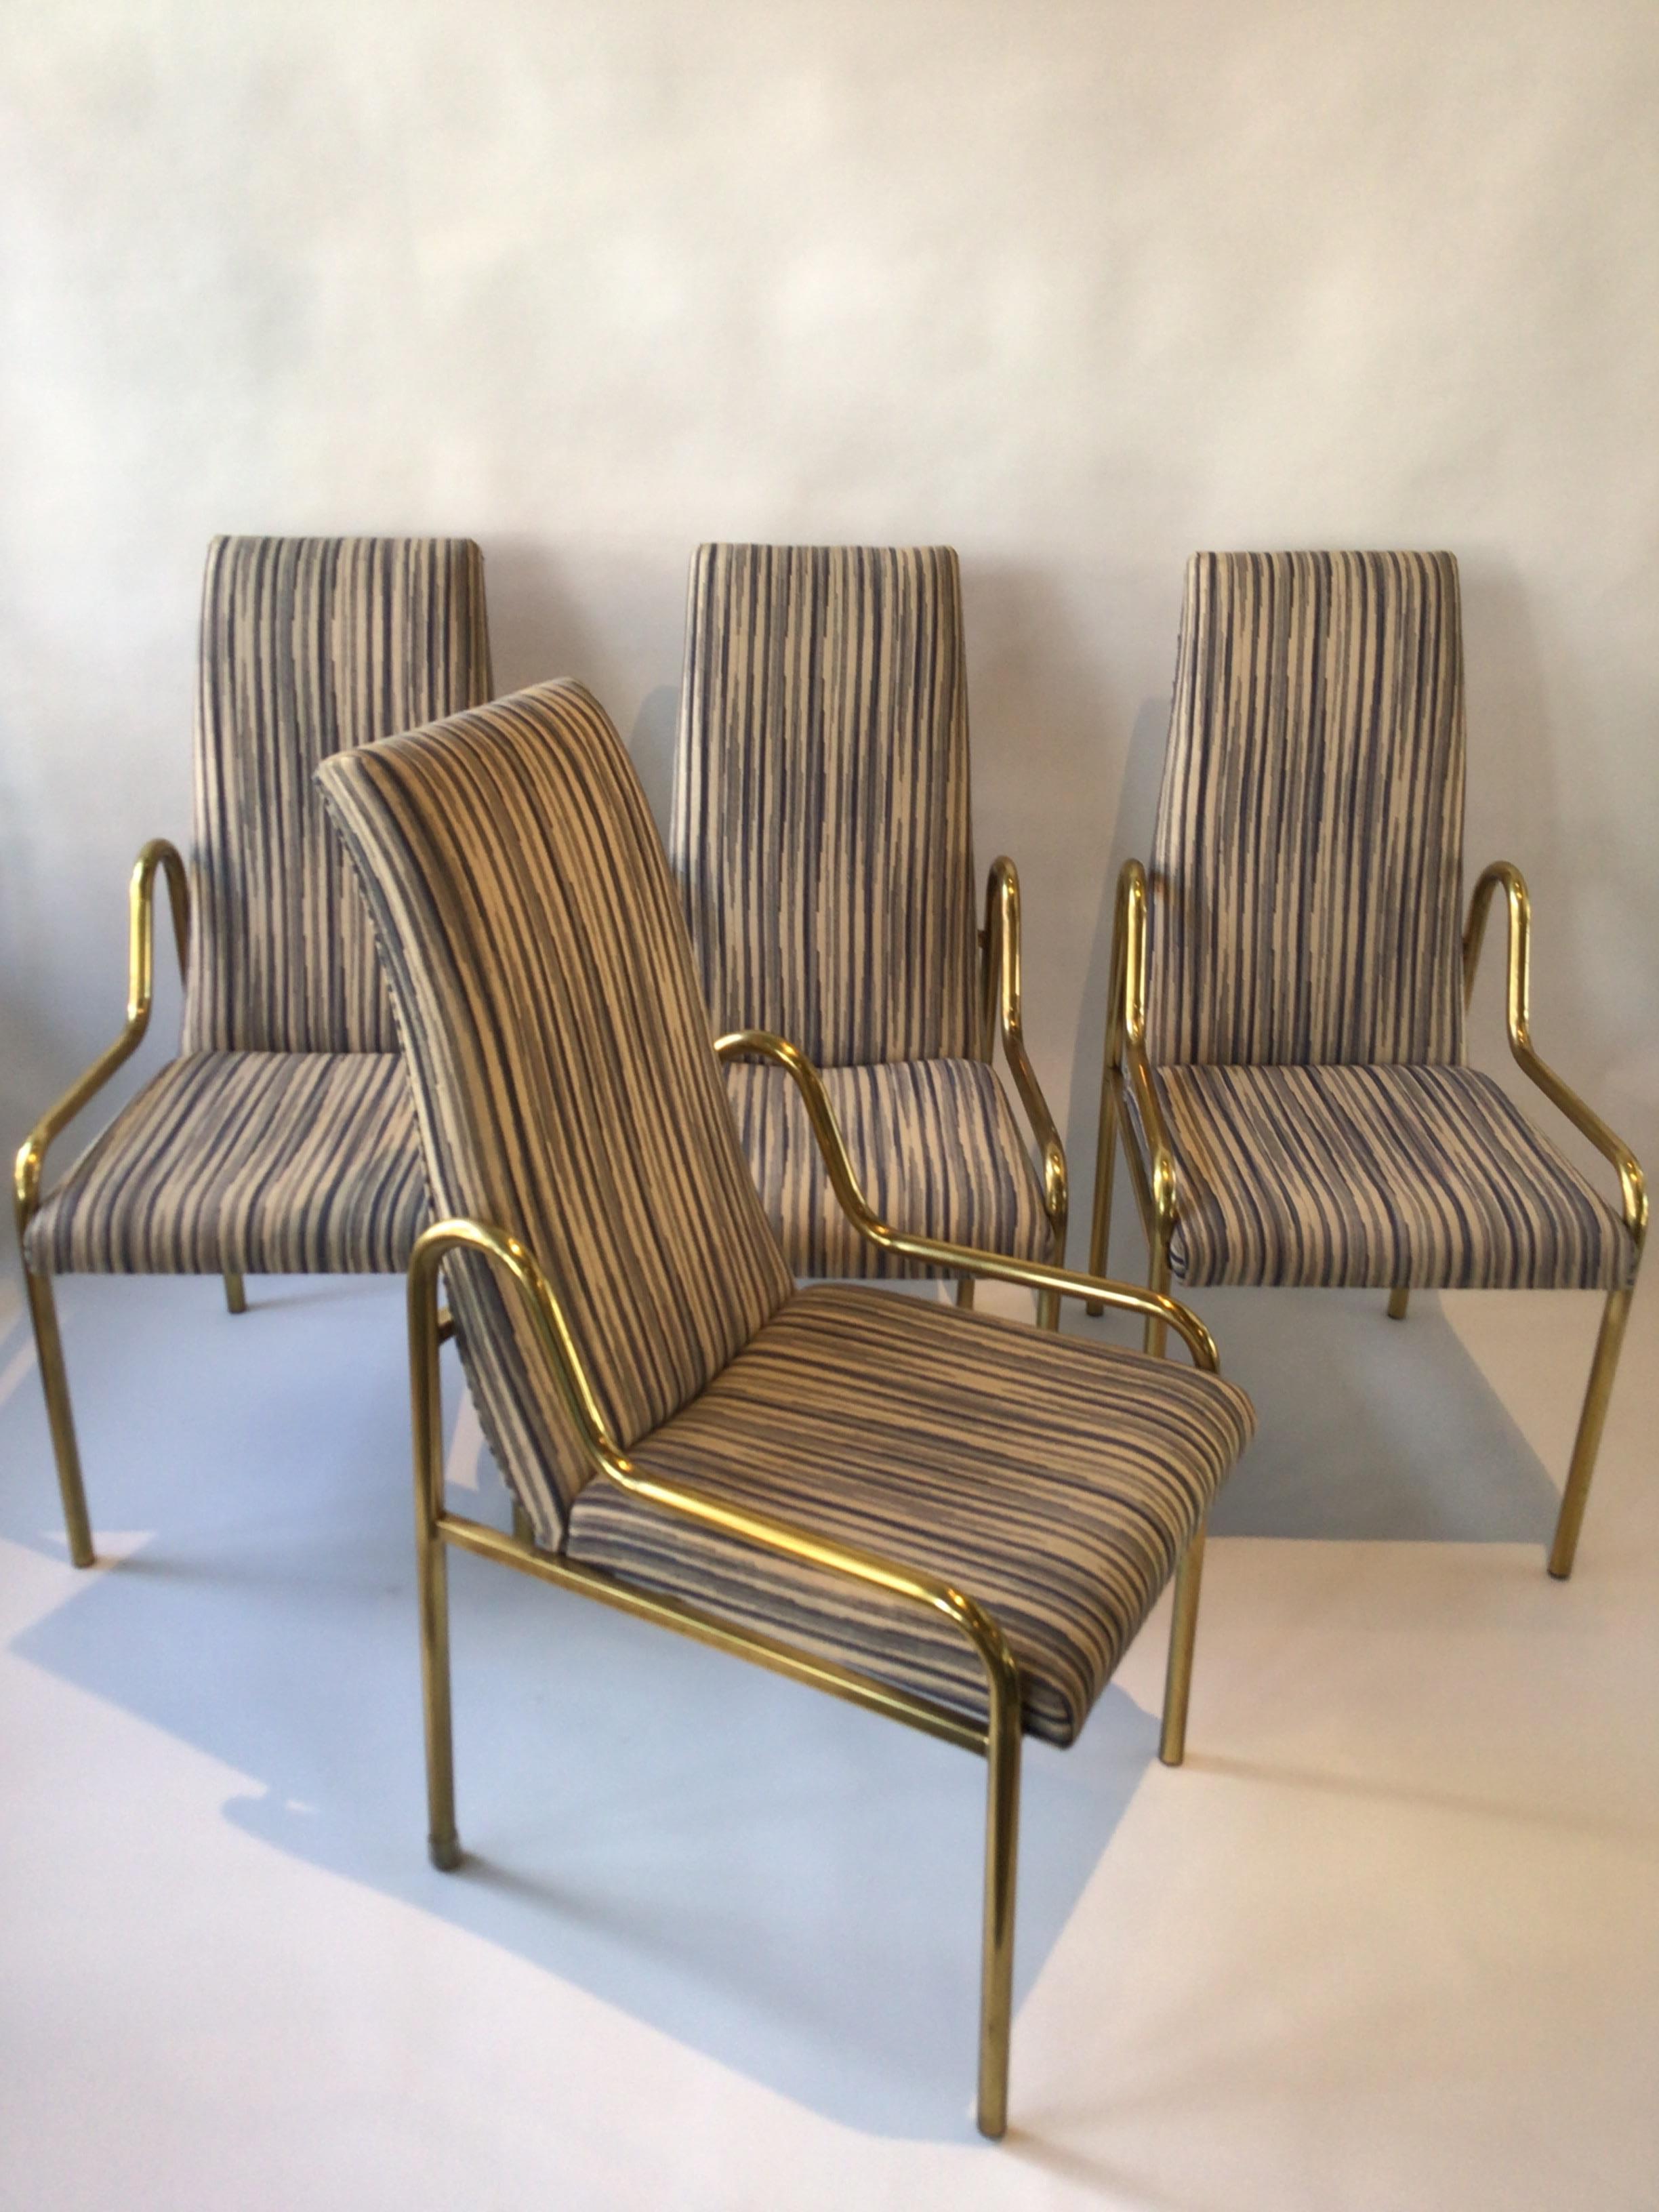 4 Brass Mastercraft dining chairs. Needs re upholstering.